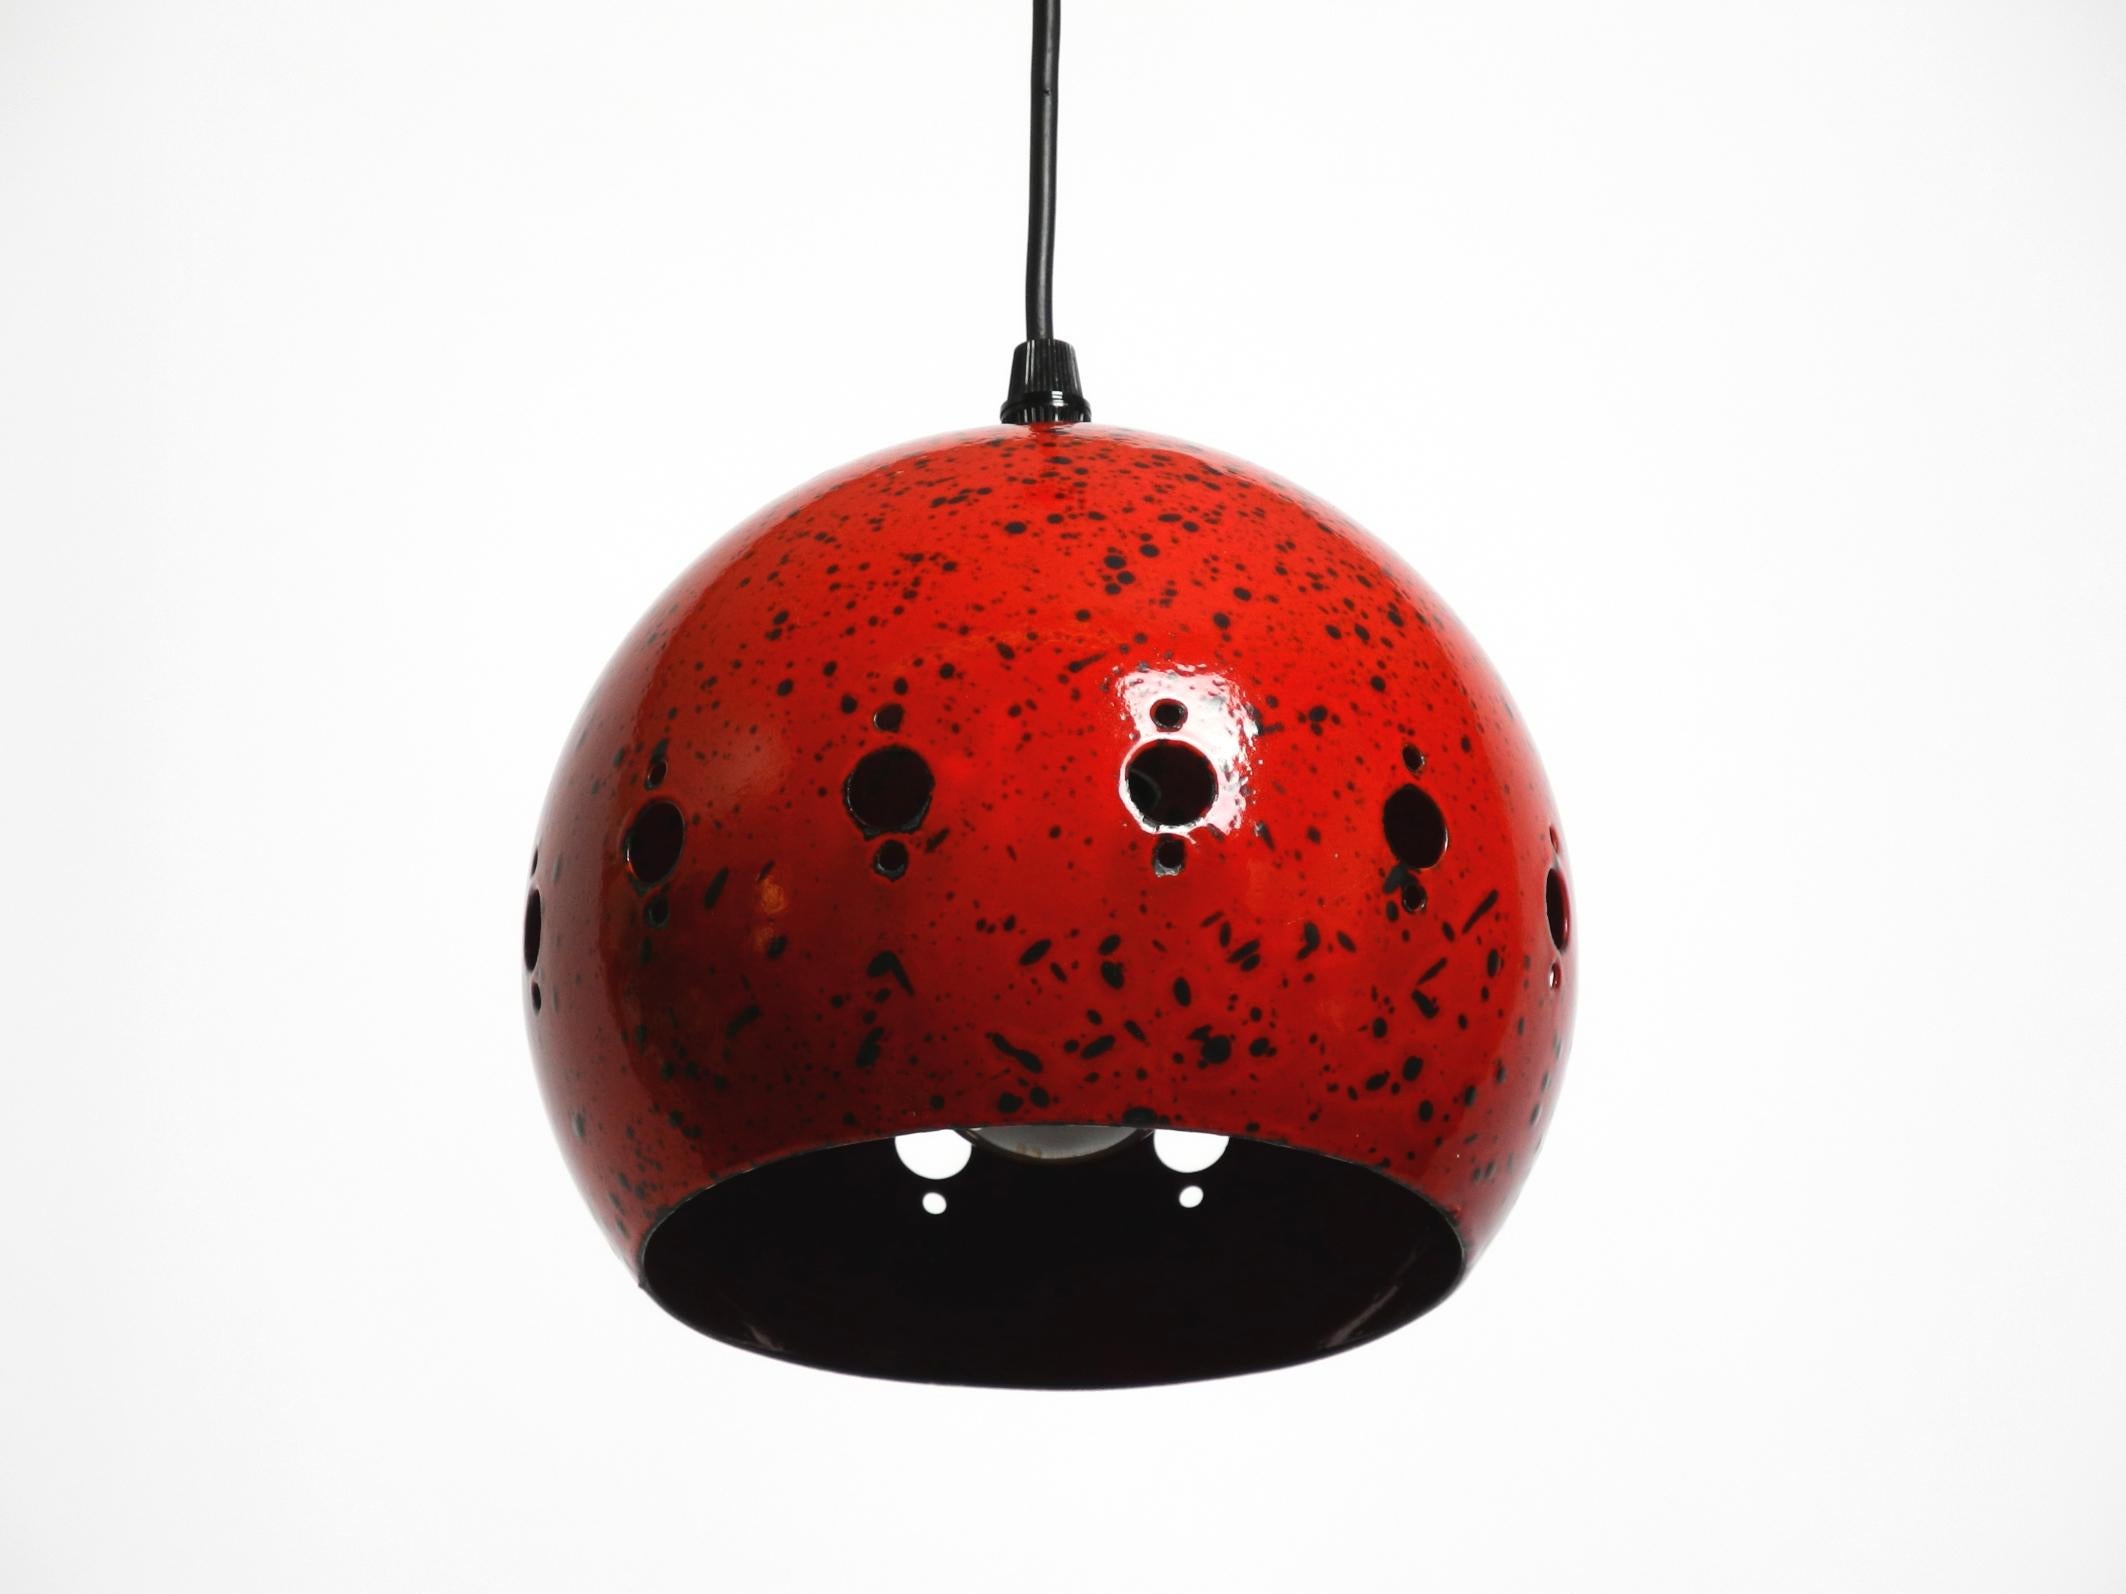 Small beautiful Mid Century Modern red black enameled metal pendant lamp.
Shiny, strong red outside and inside with black dots of different sizes.
The metal canopy is also enamelled on the outside in the same color.
Most likely from Scandinavian